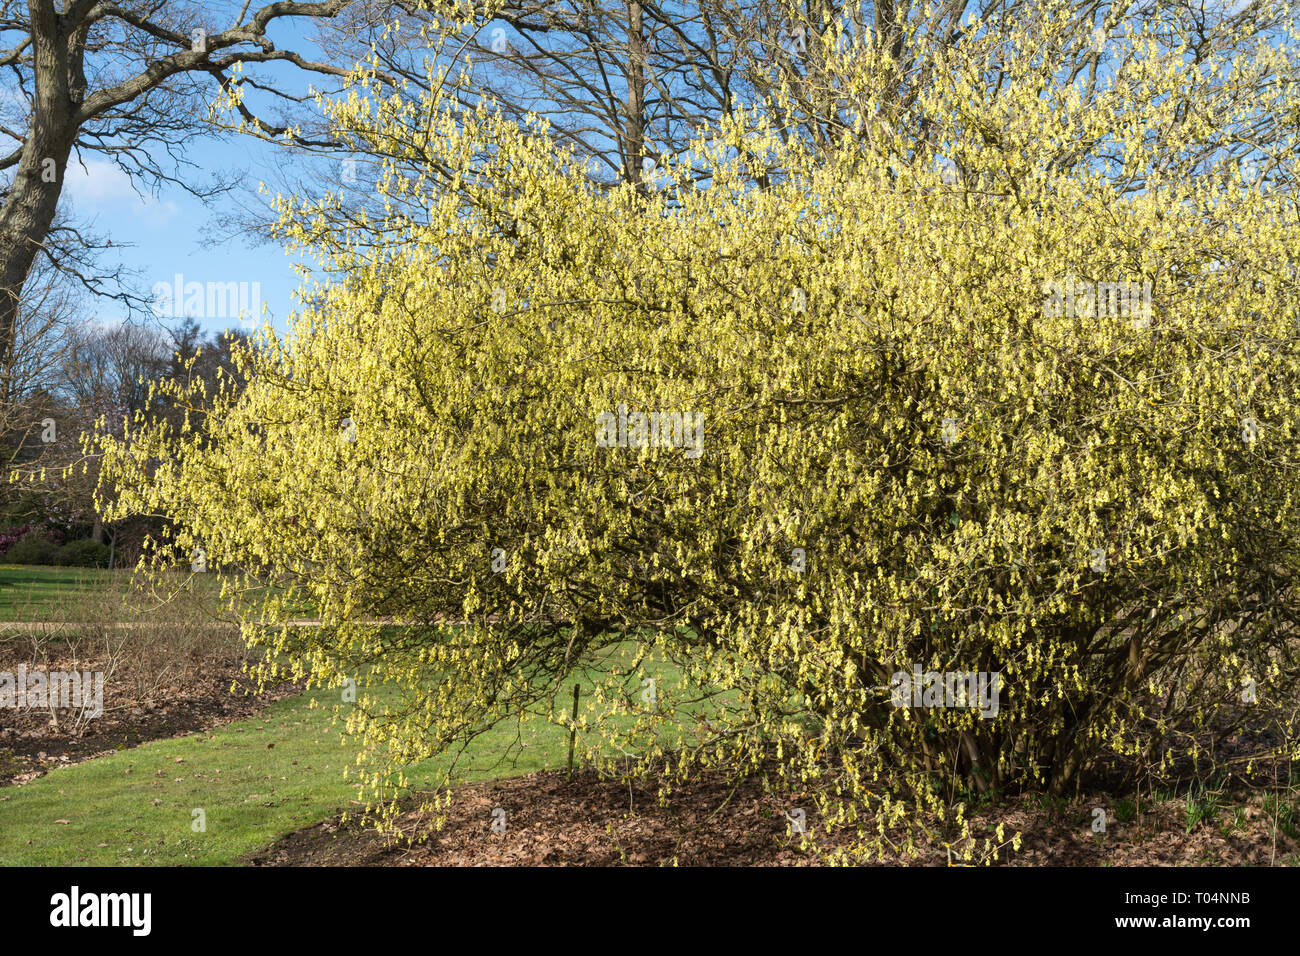 Winter hazel (Corylopsis spicata) with yellow flowers in early spring march in an English garden, UK Stock Photo